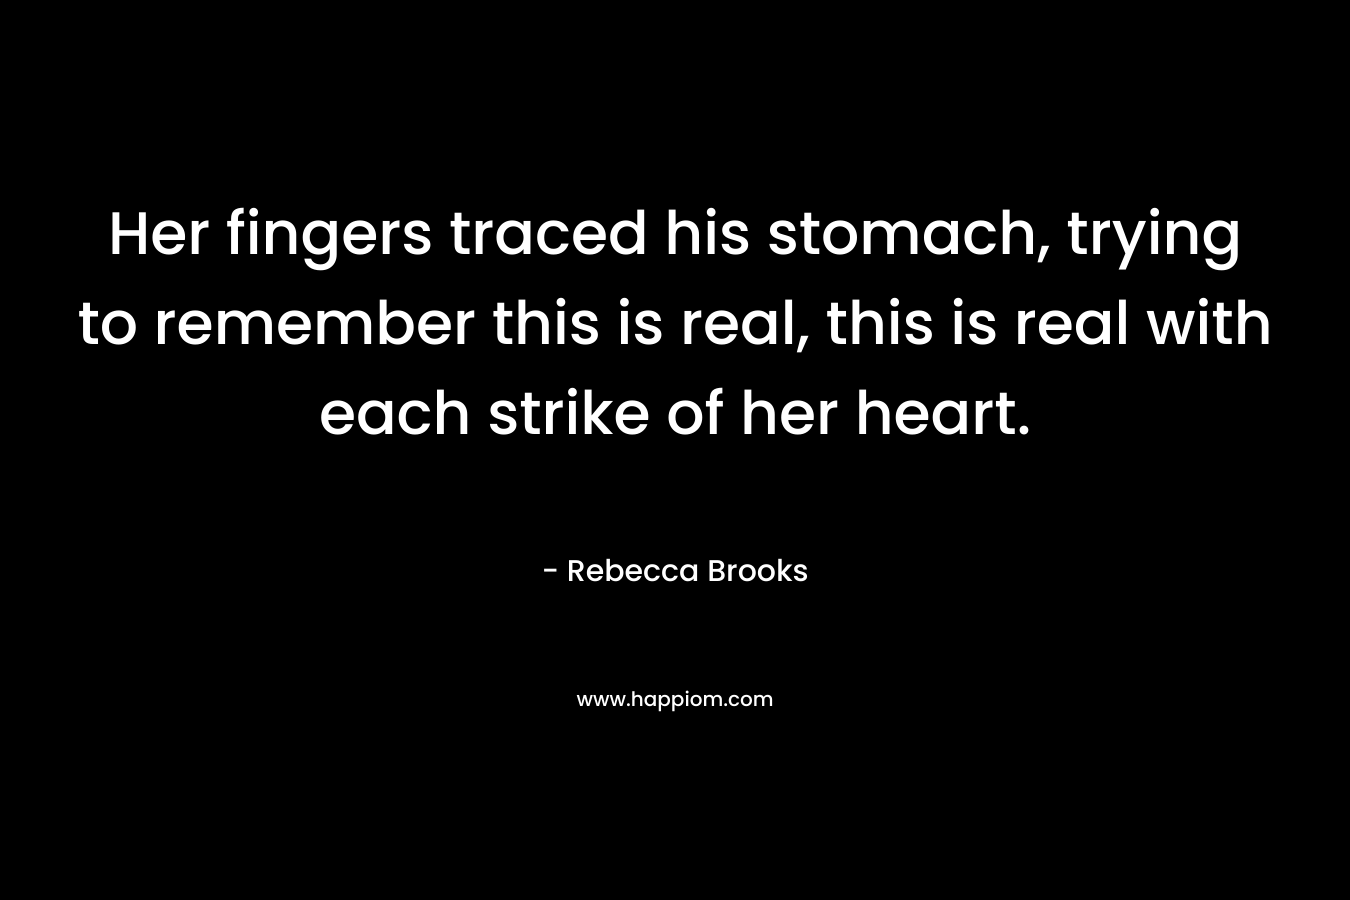 Her fingers traced his stomach, trying to remember this is real, this is real with each strike of her heart. – Rebecca Brooks